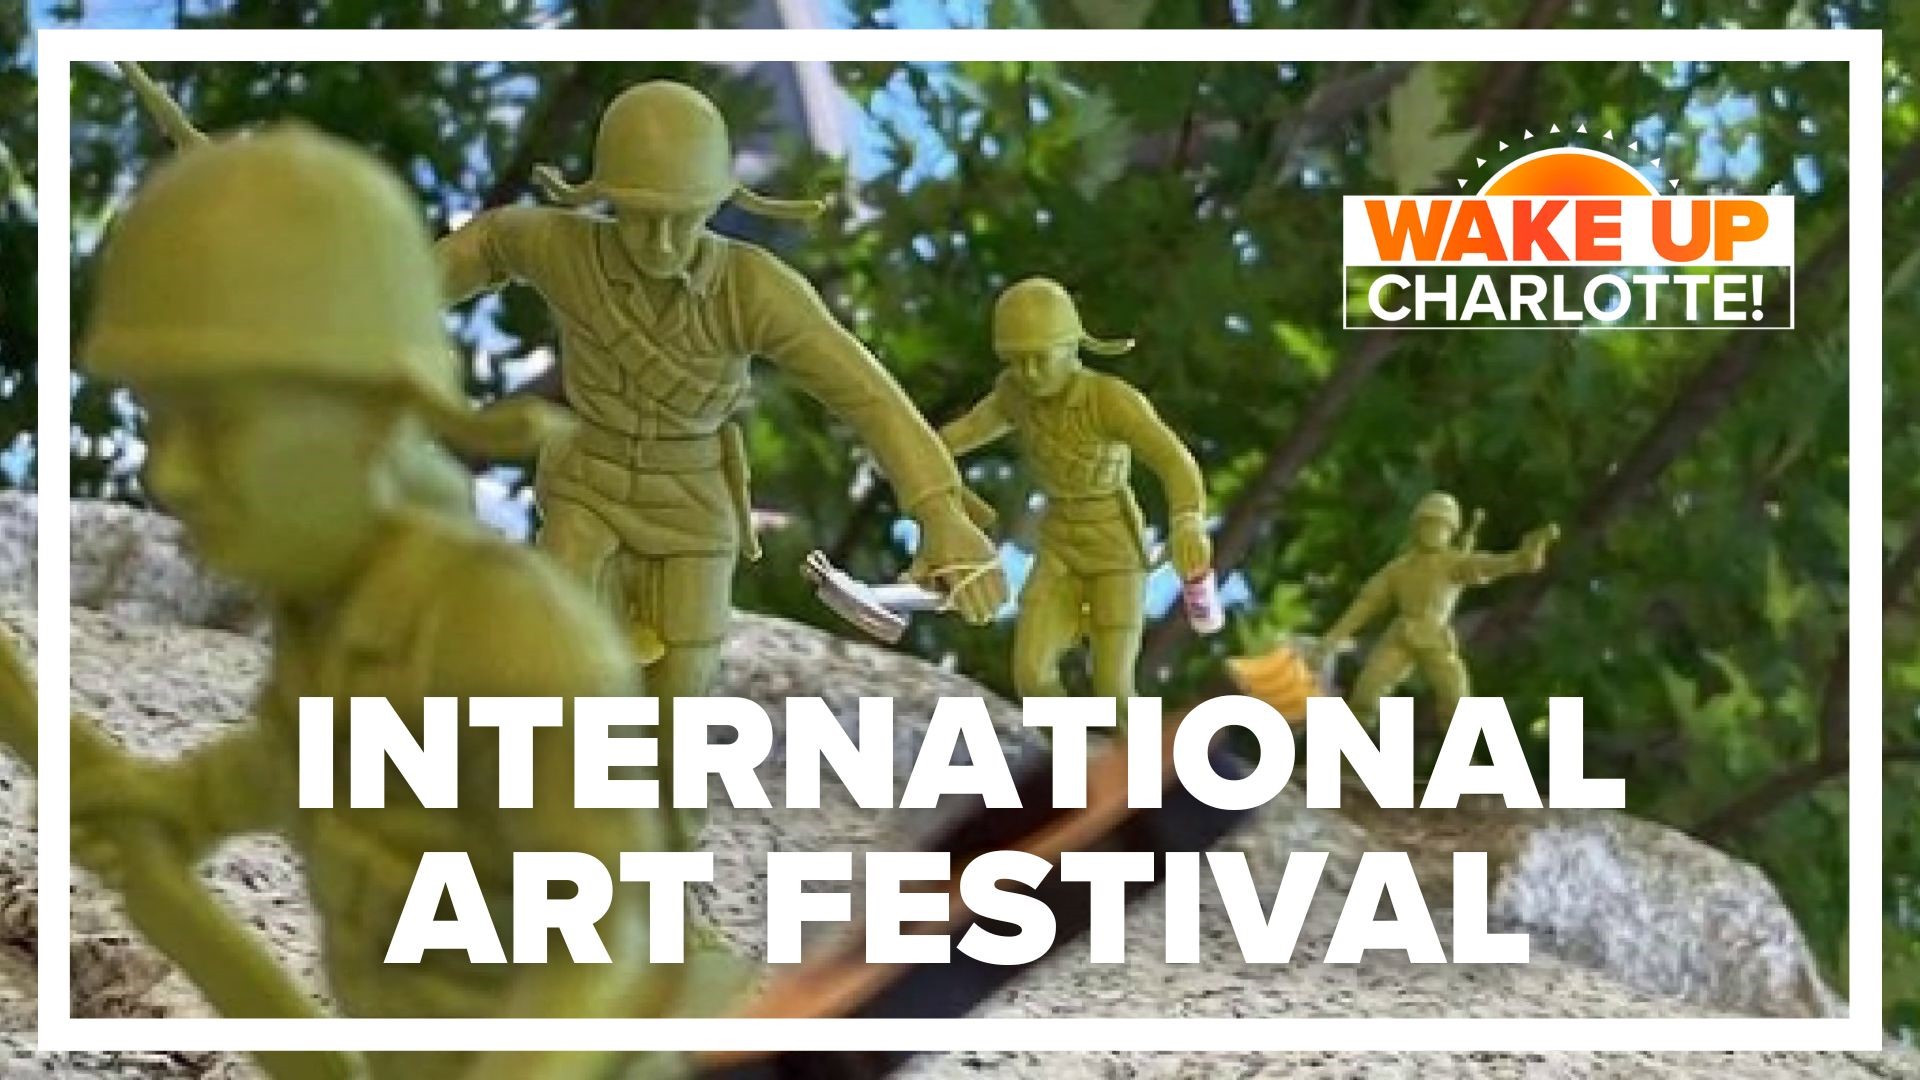 The Charlotte International Arts Festival starts Friday, bringing over 200 attractions to the Charlotte area.